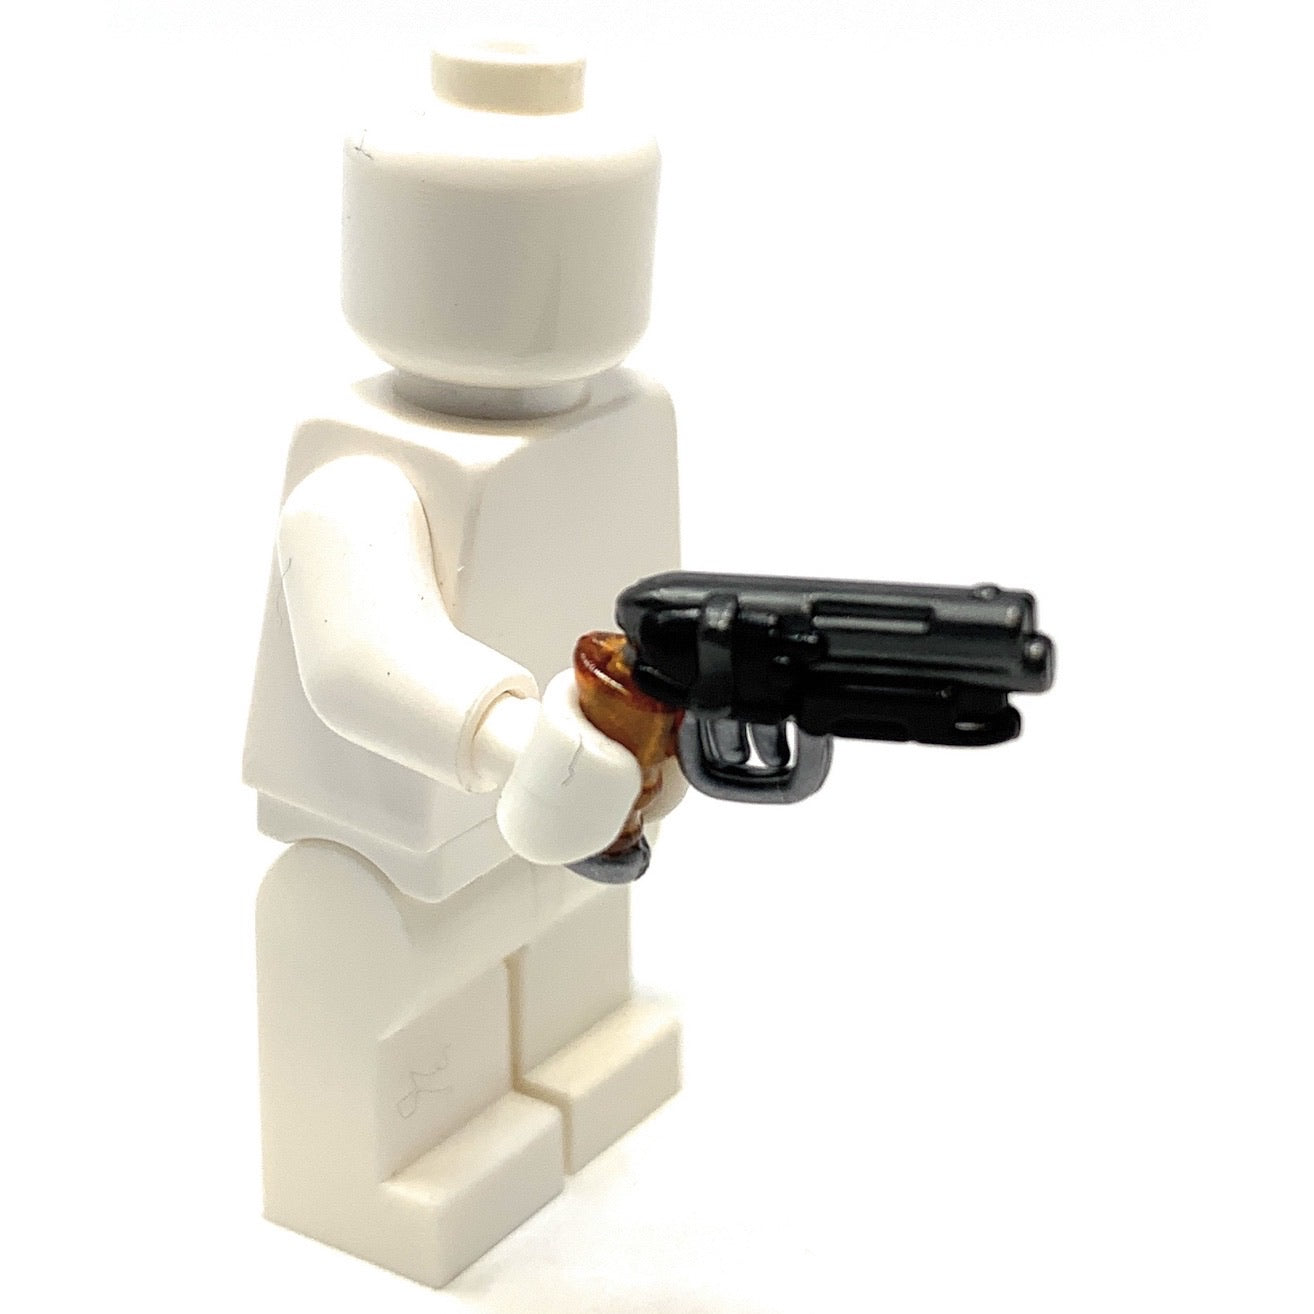 M2019 RELOADED - BrickArms®